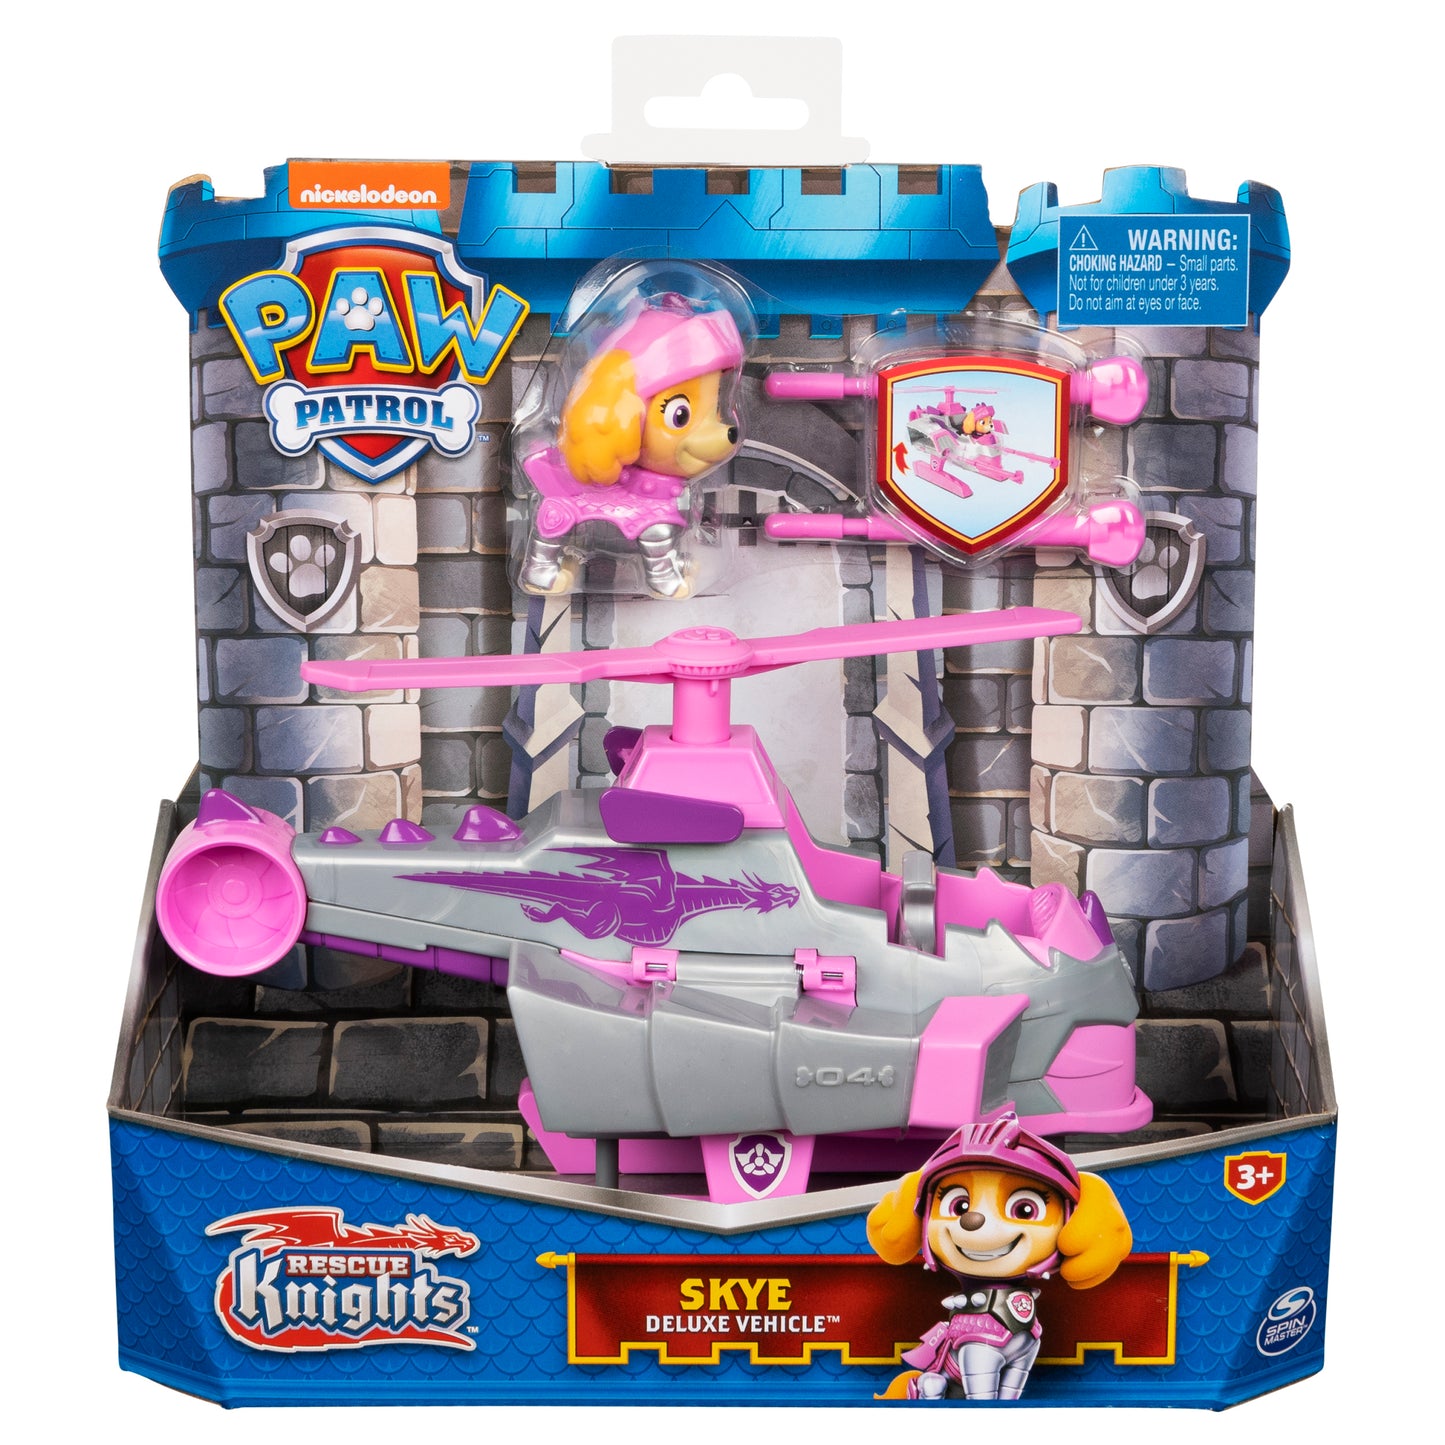 PAW Patrol, Rescue Knights Skye Transforming Toy Car with Collectible Action Figure, Kids Toys for Ages 3 and up